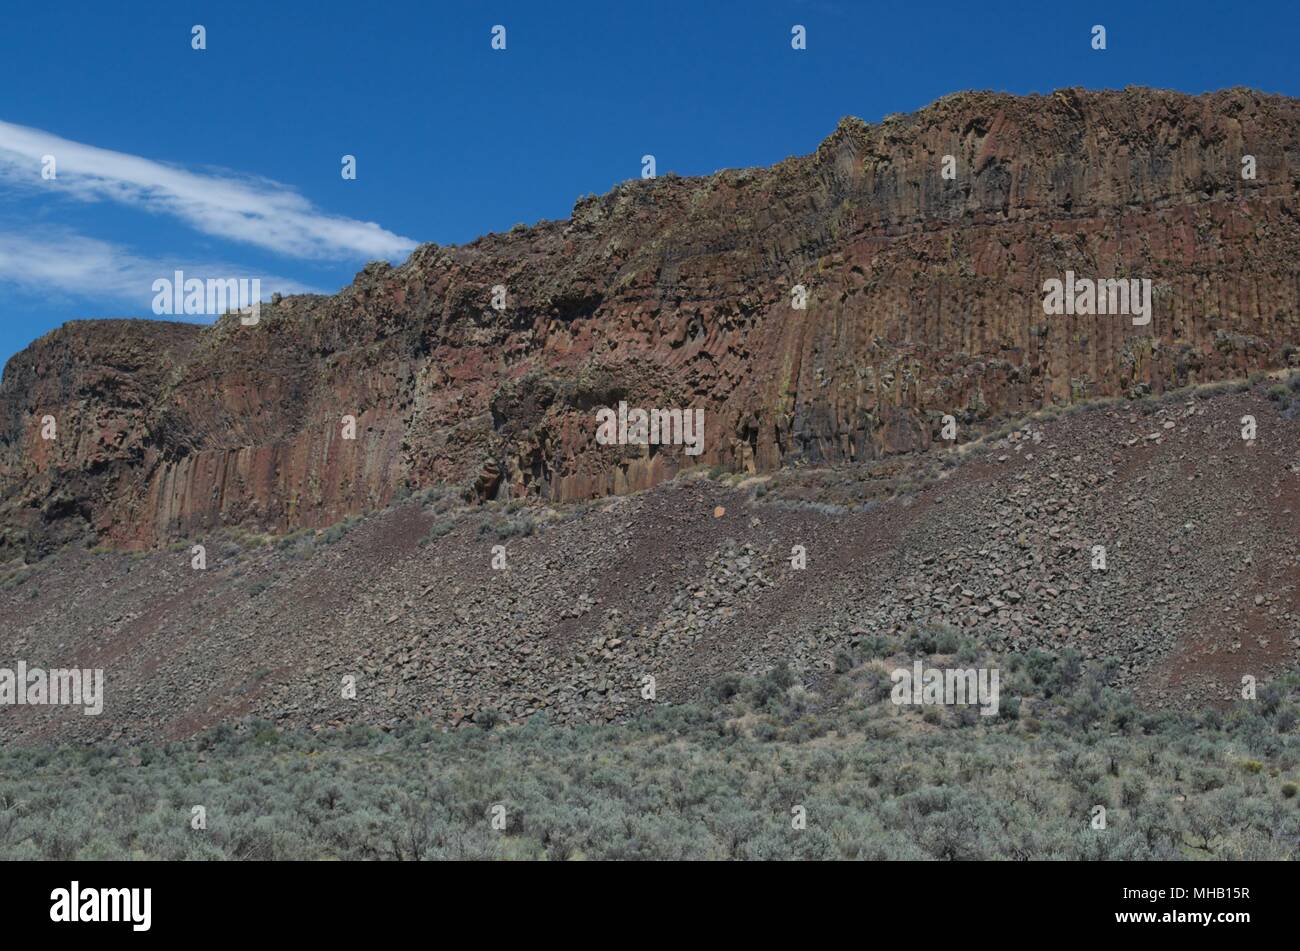 The Channeled Scablands 4 Stock Photo